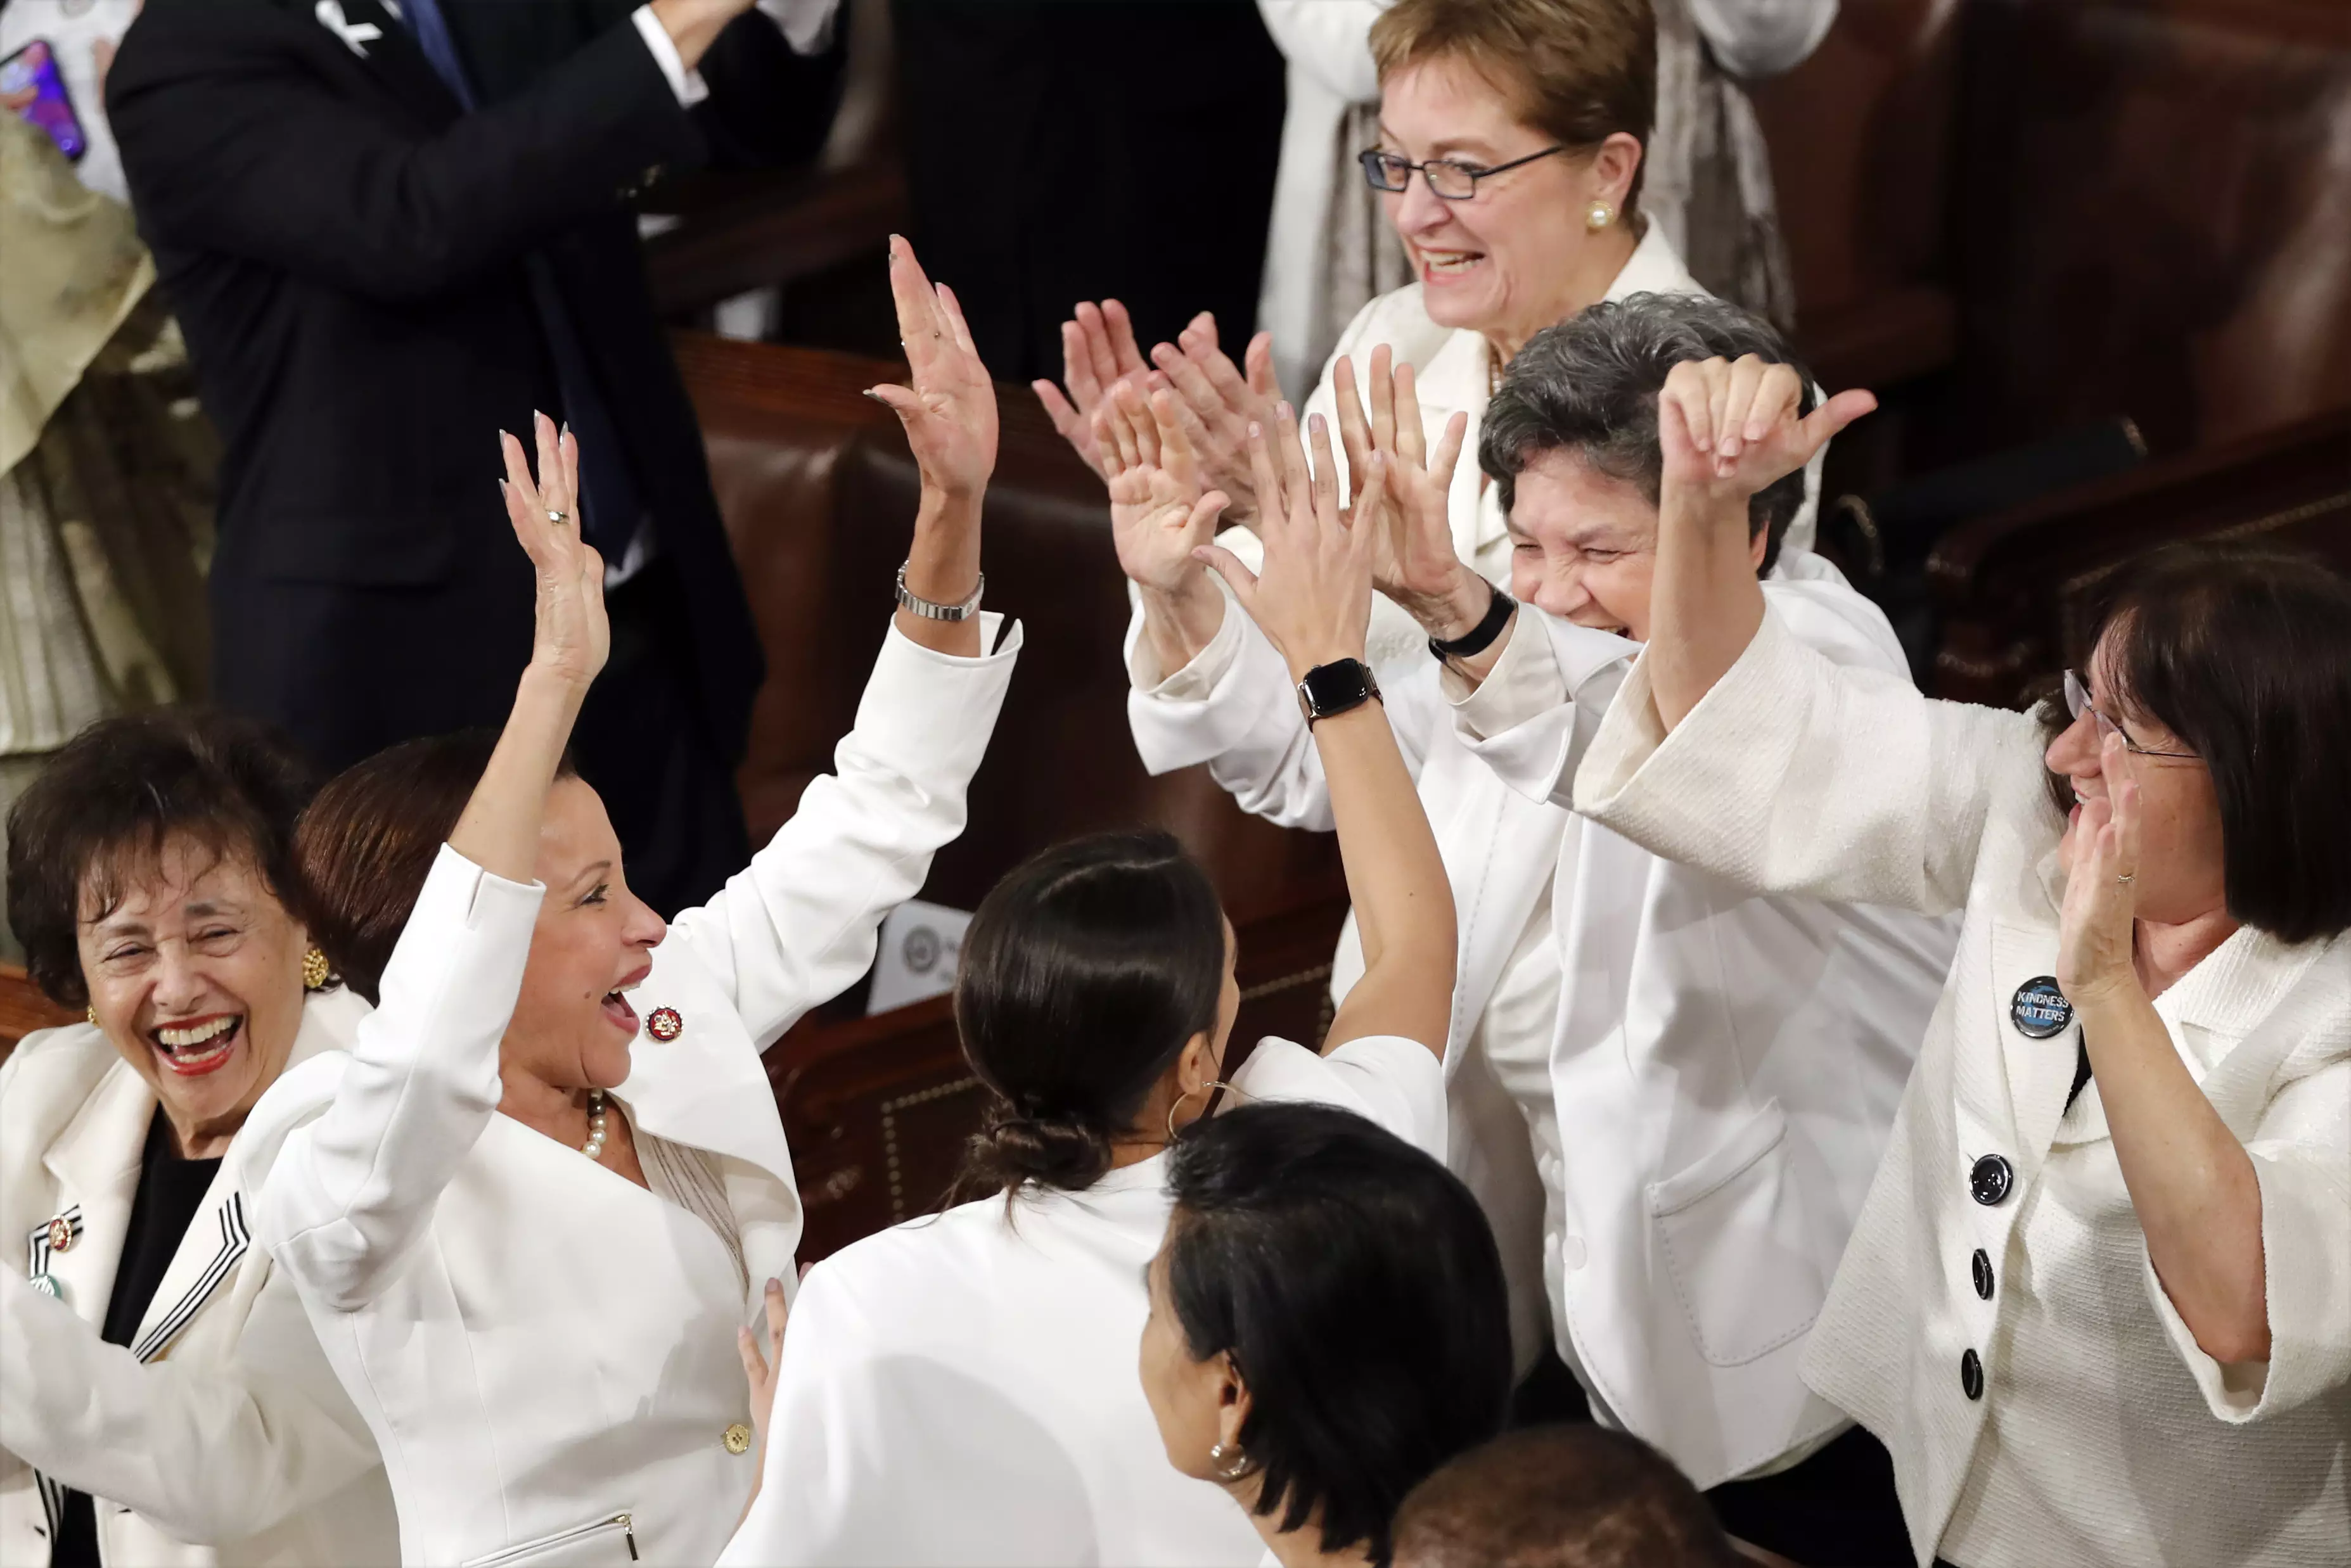 Members of Congress cheer after President Donald Trump acknowledges the record number of women in congress.